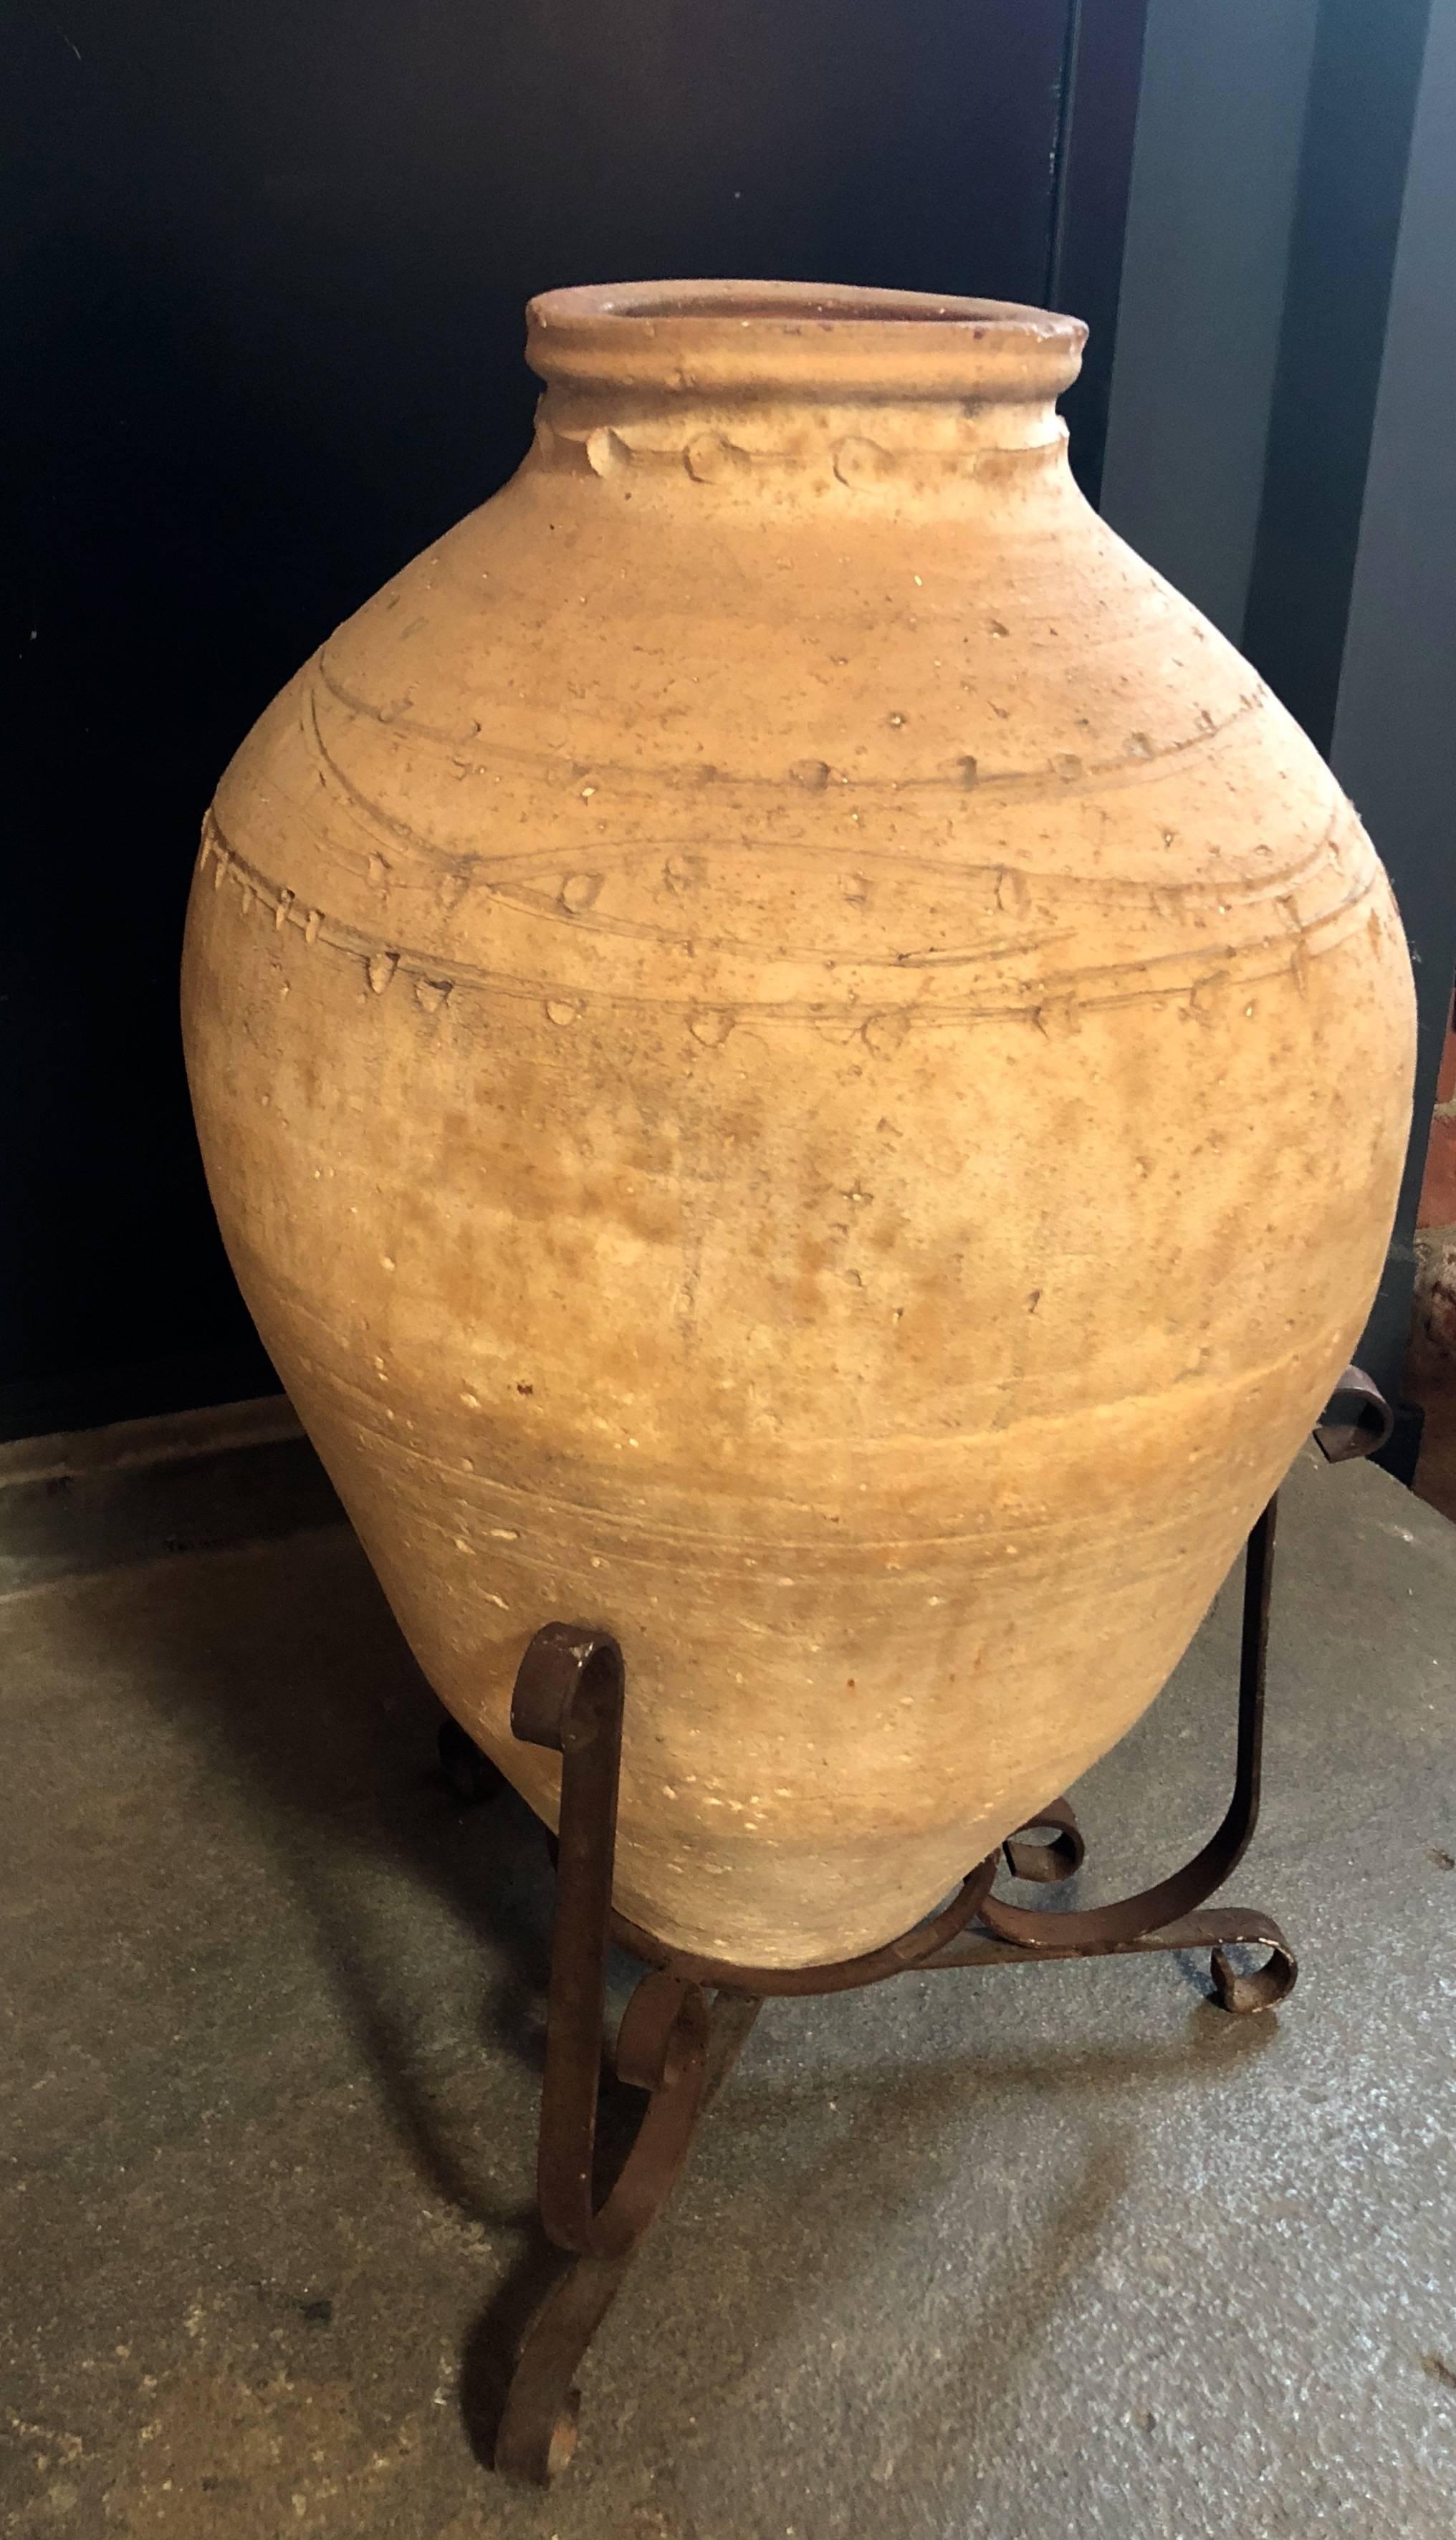 This impressive late 18th century terracotta water jar was found in Puglia (South of Italy)
In excellent condition and with great character, this jar once had a nice metal base and served as the water source for a 